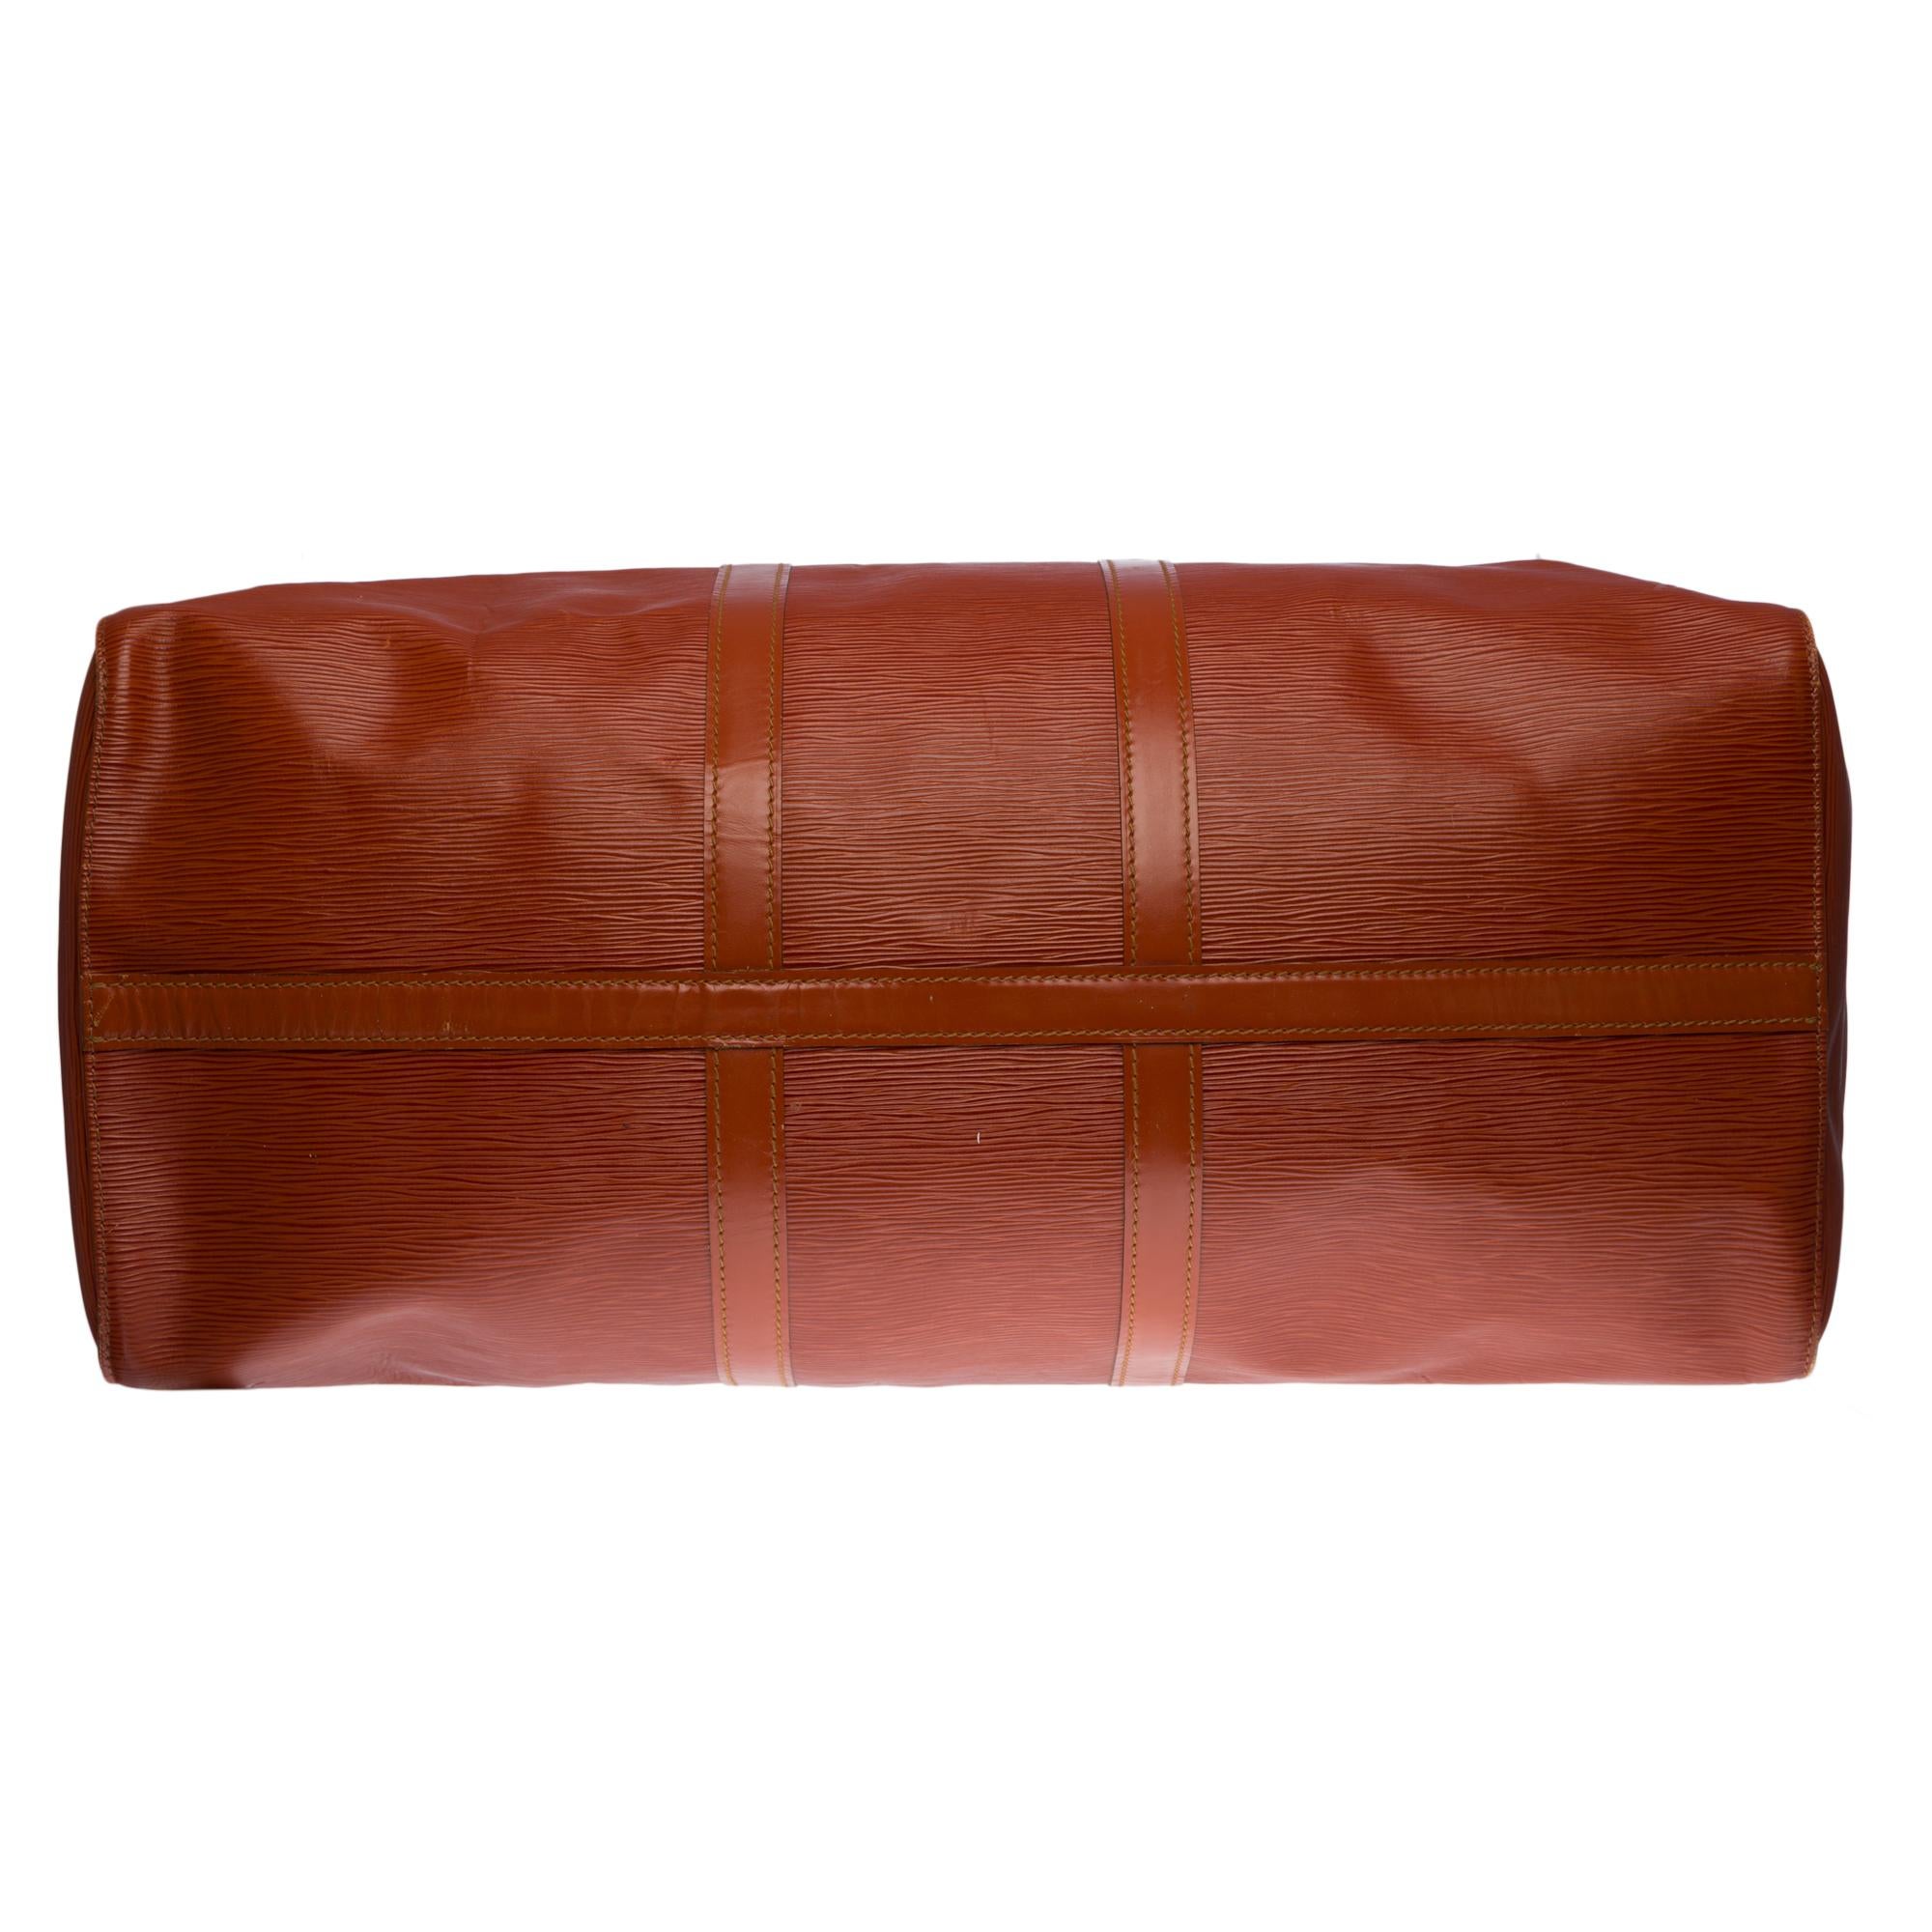 Louis Vuitton Keepall 55 Travel bag in Brown épi leather 5